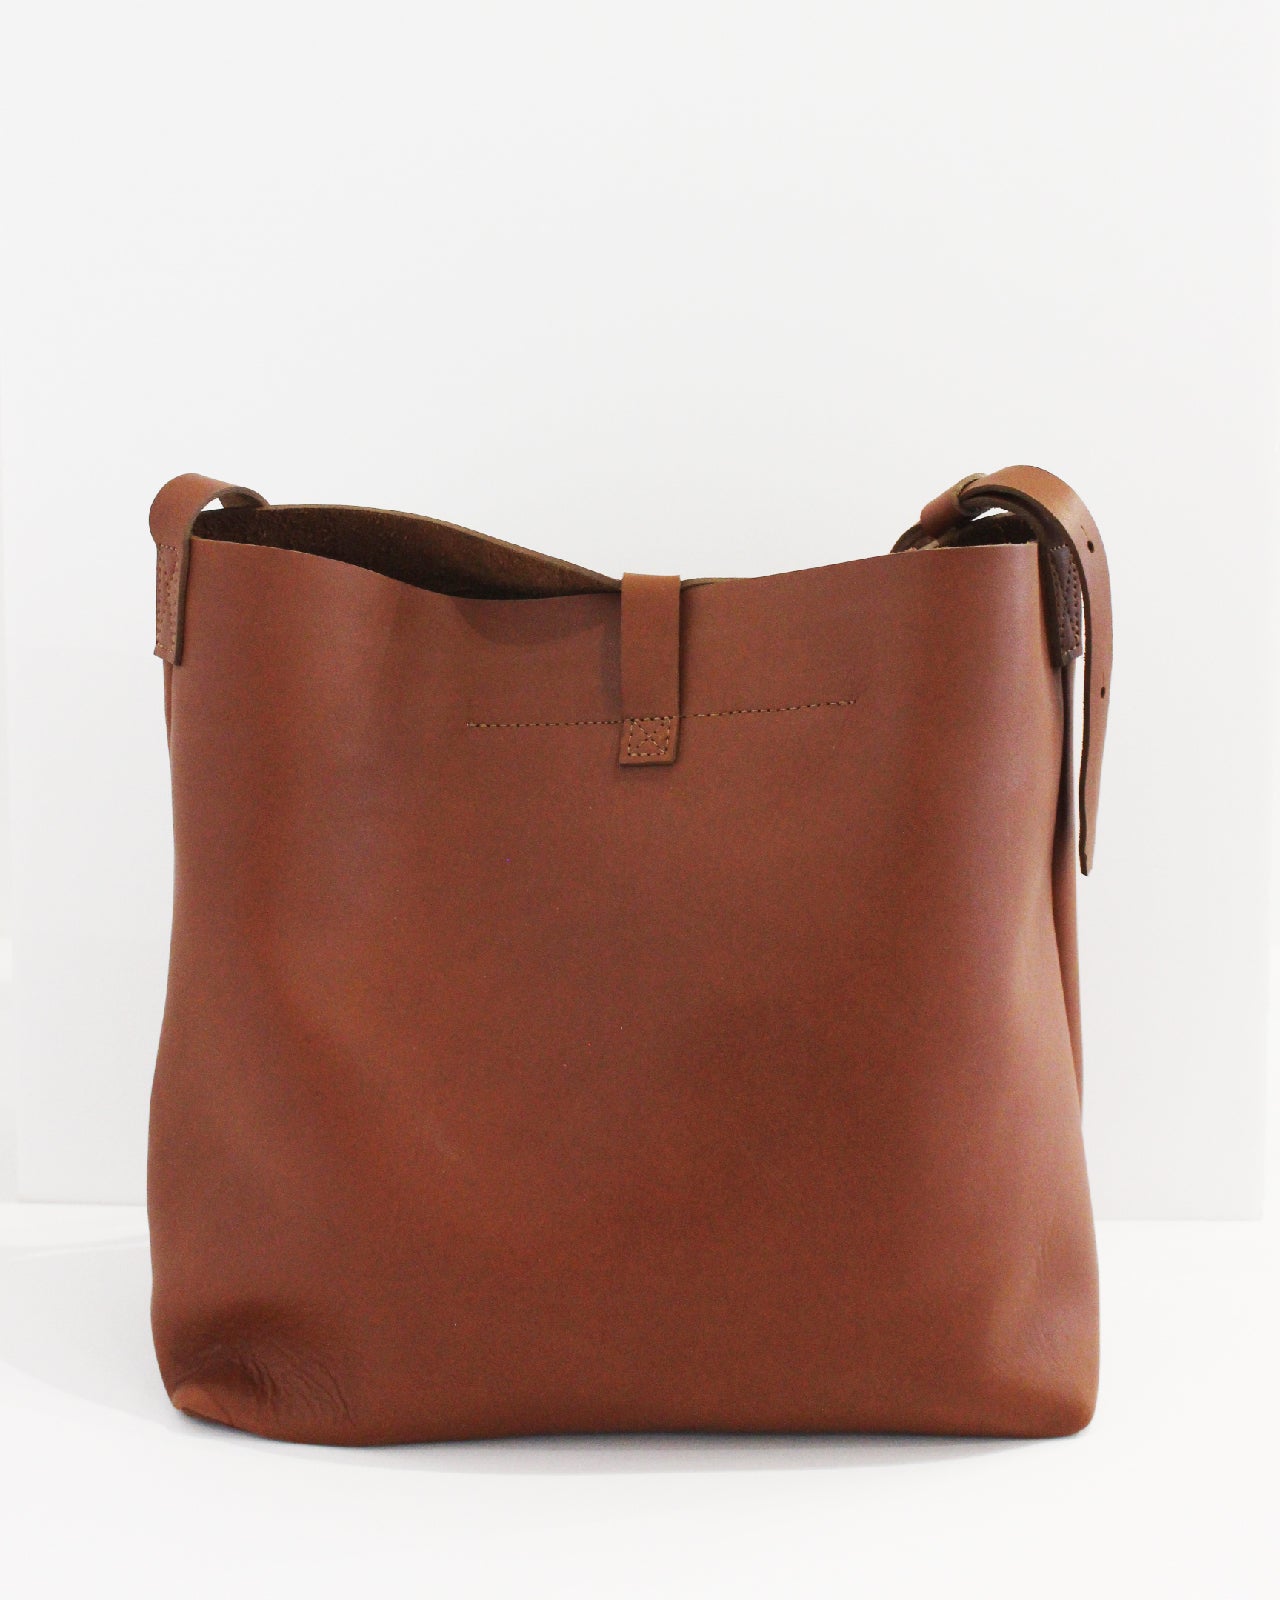 ESBY BUCKET TOTE - BROWN